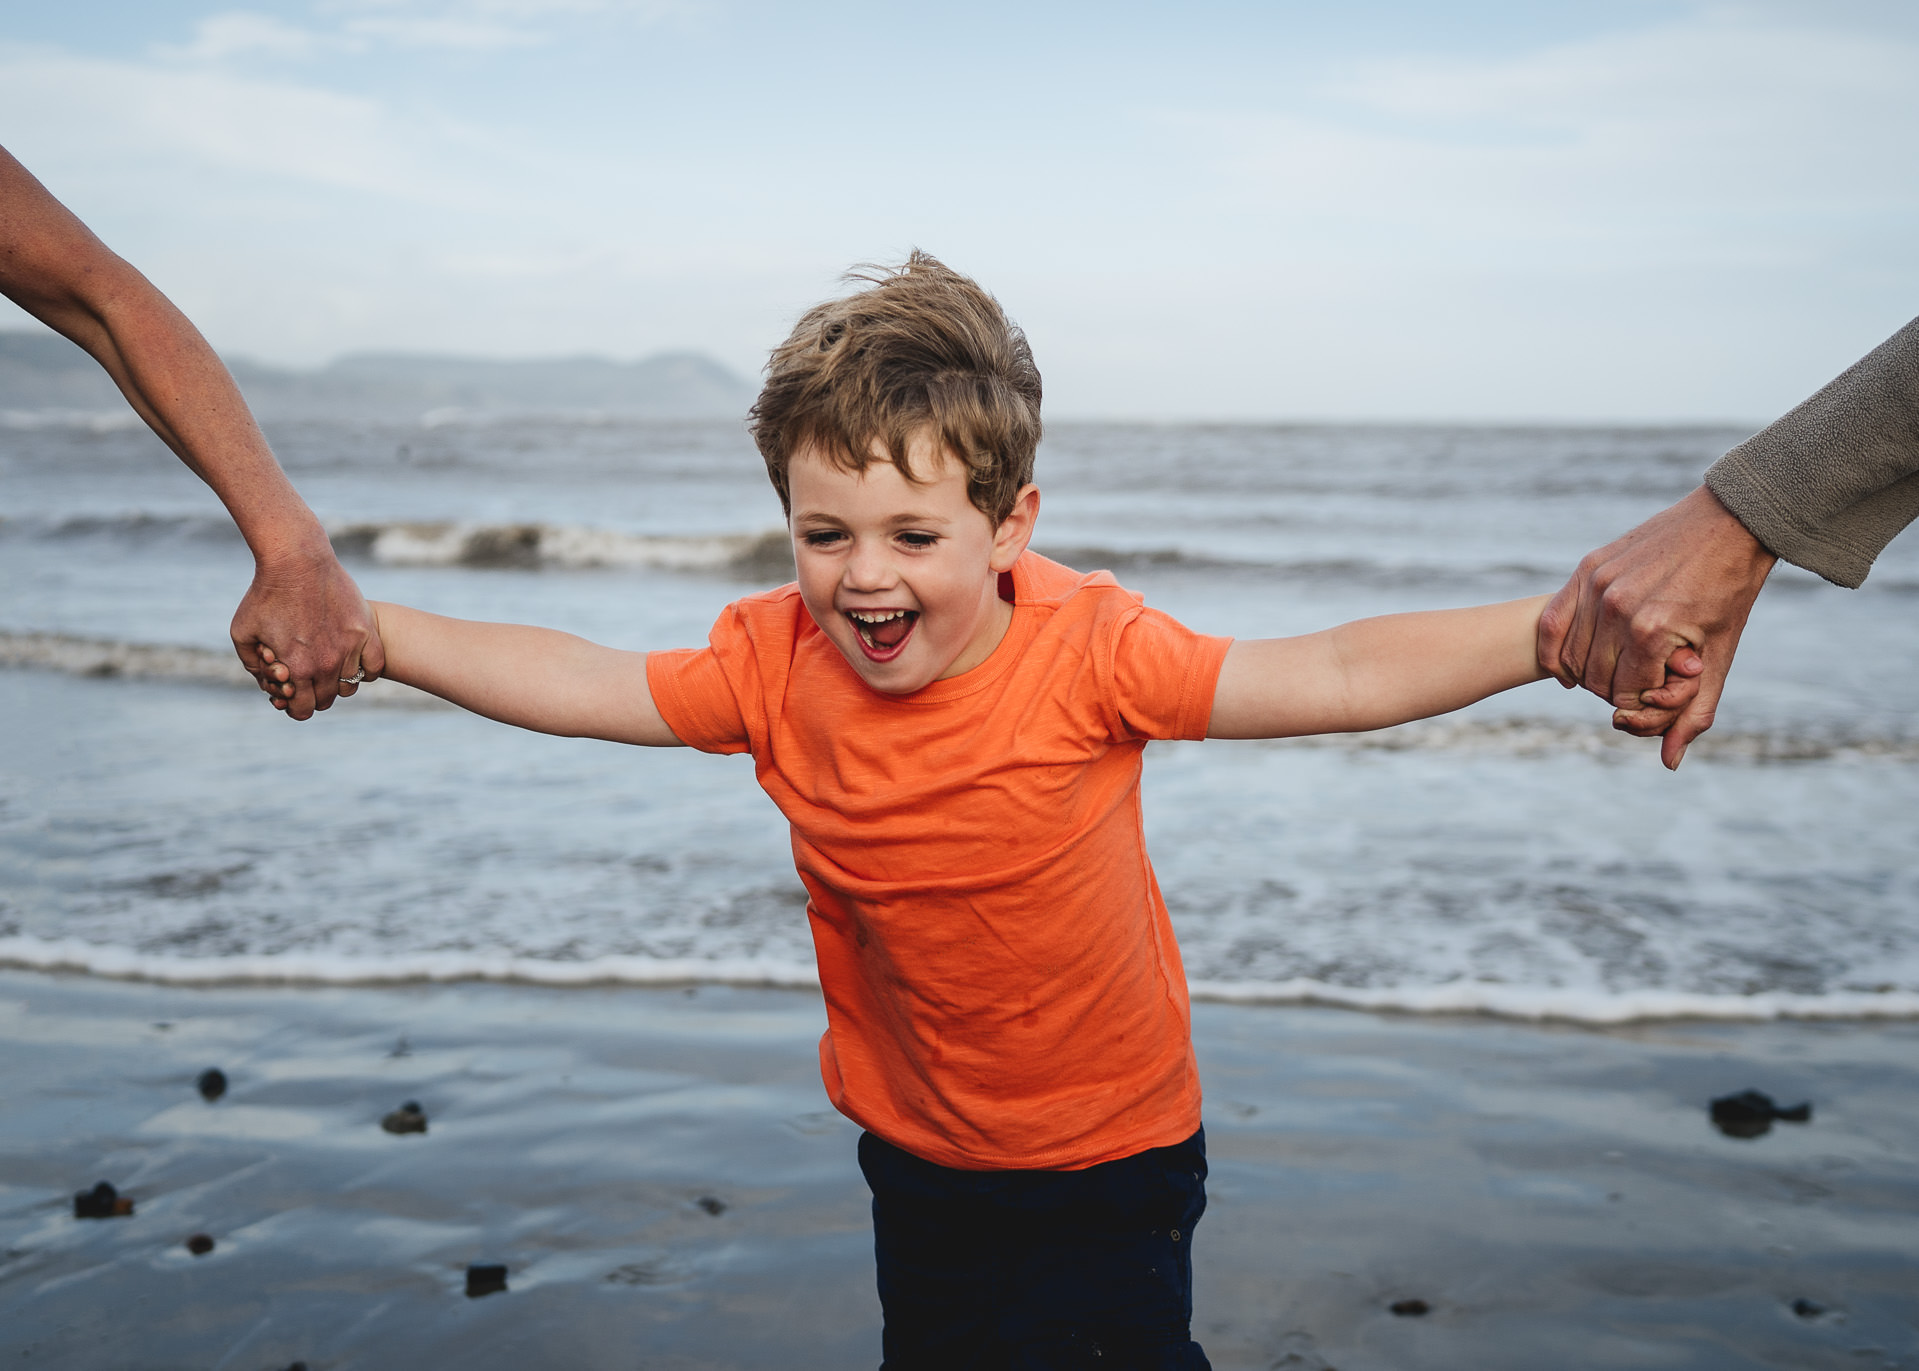 A young boy in a bright orange t-shirt laughing holding parents' hands at the beach